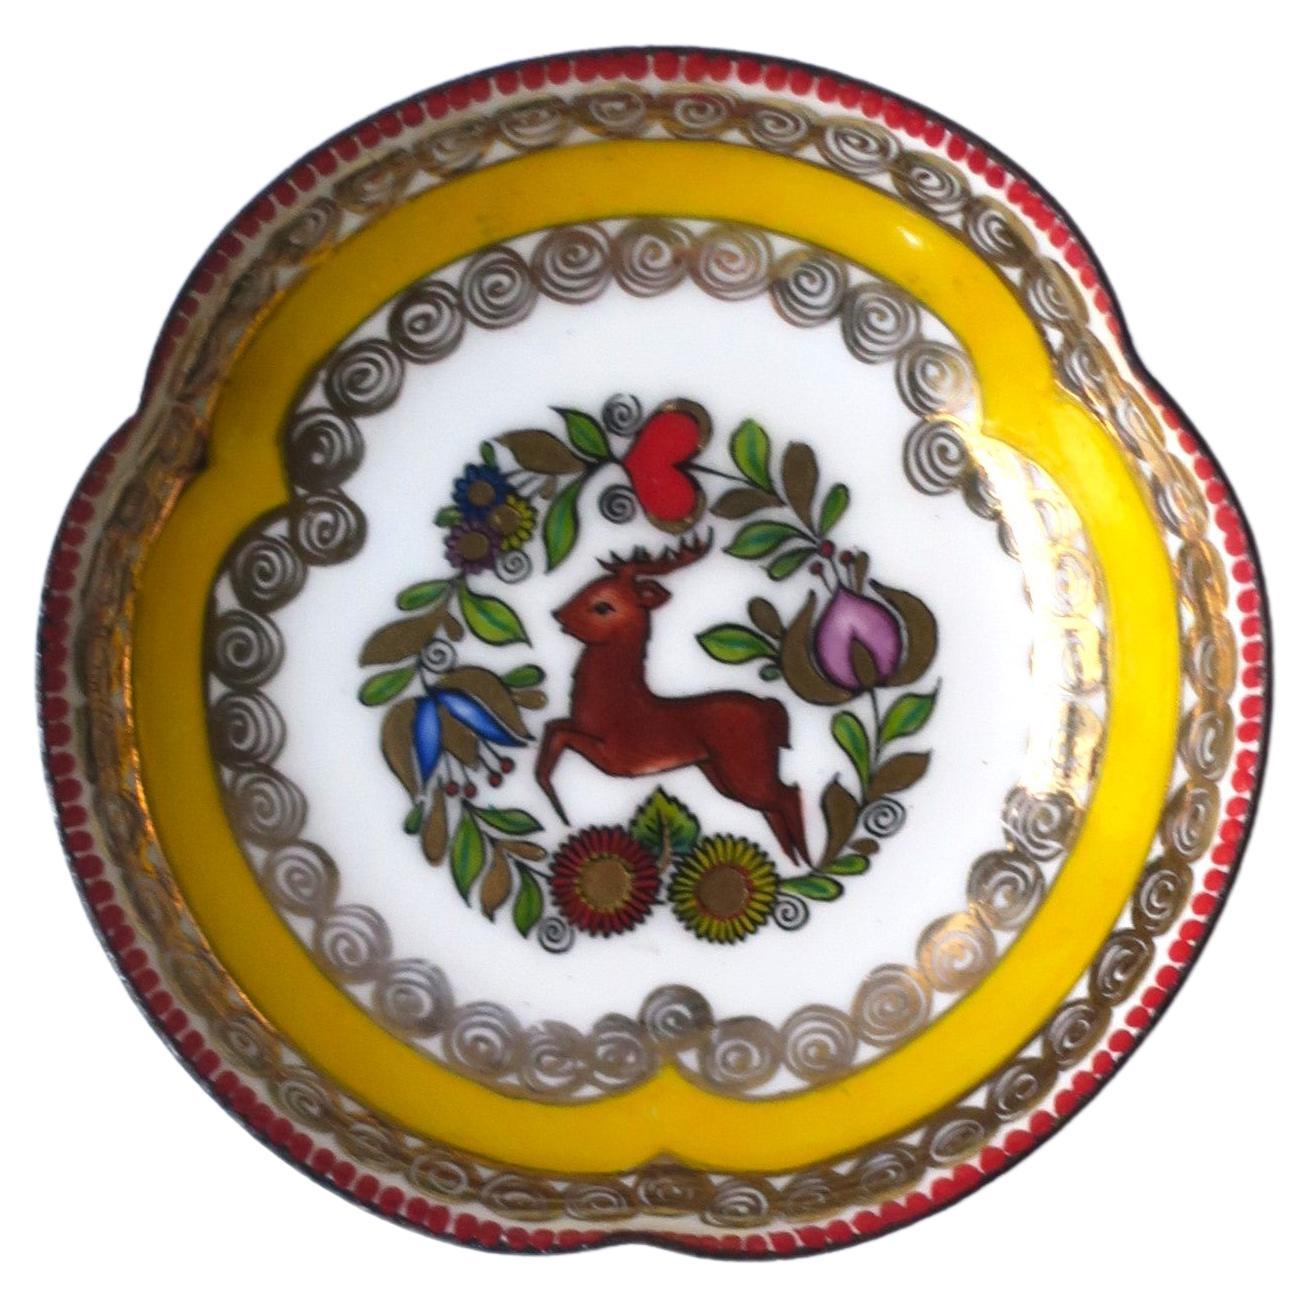 Austrian Enamel Jewely or Pill Dish with Stag Buck Deer